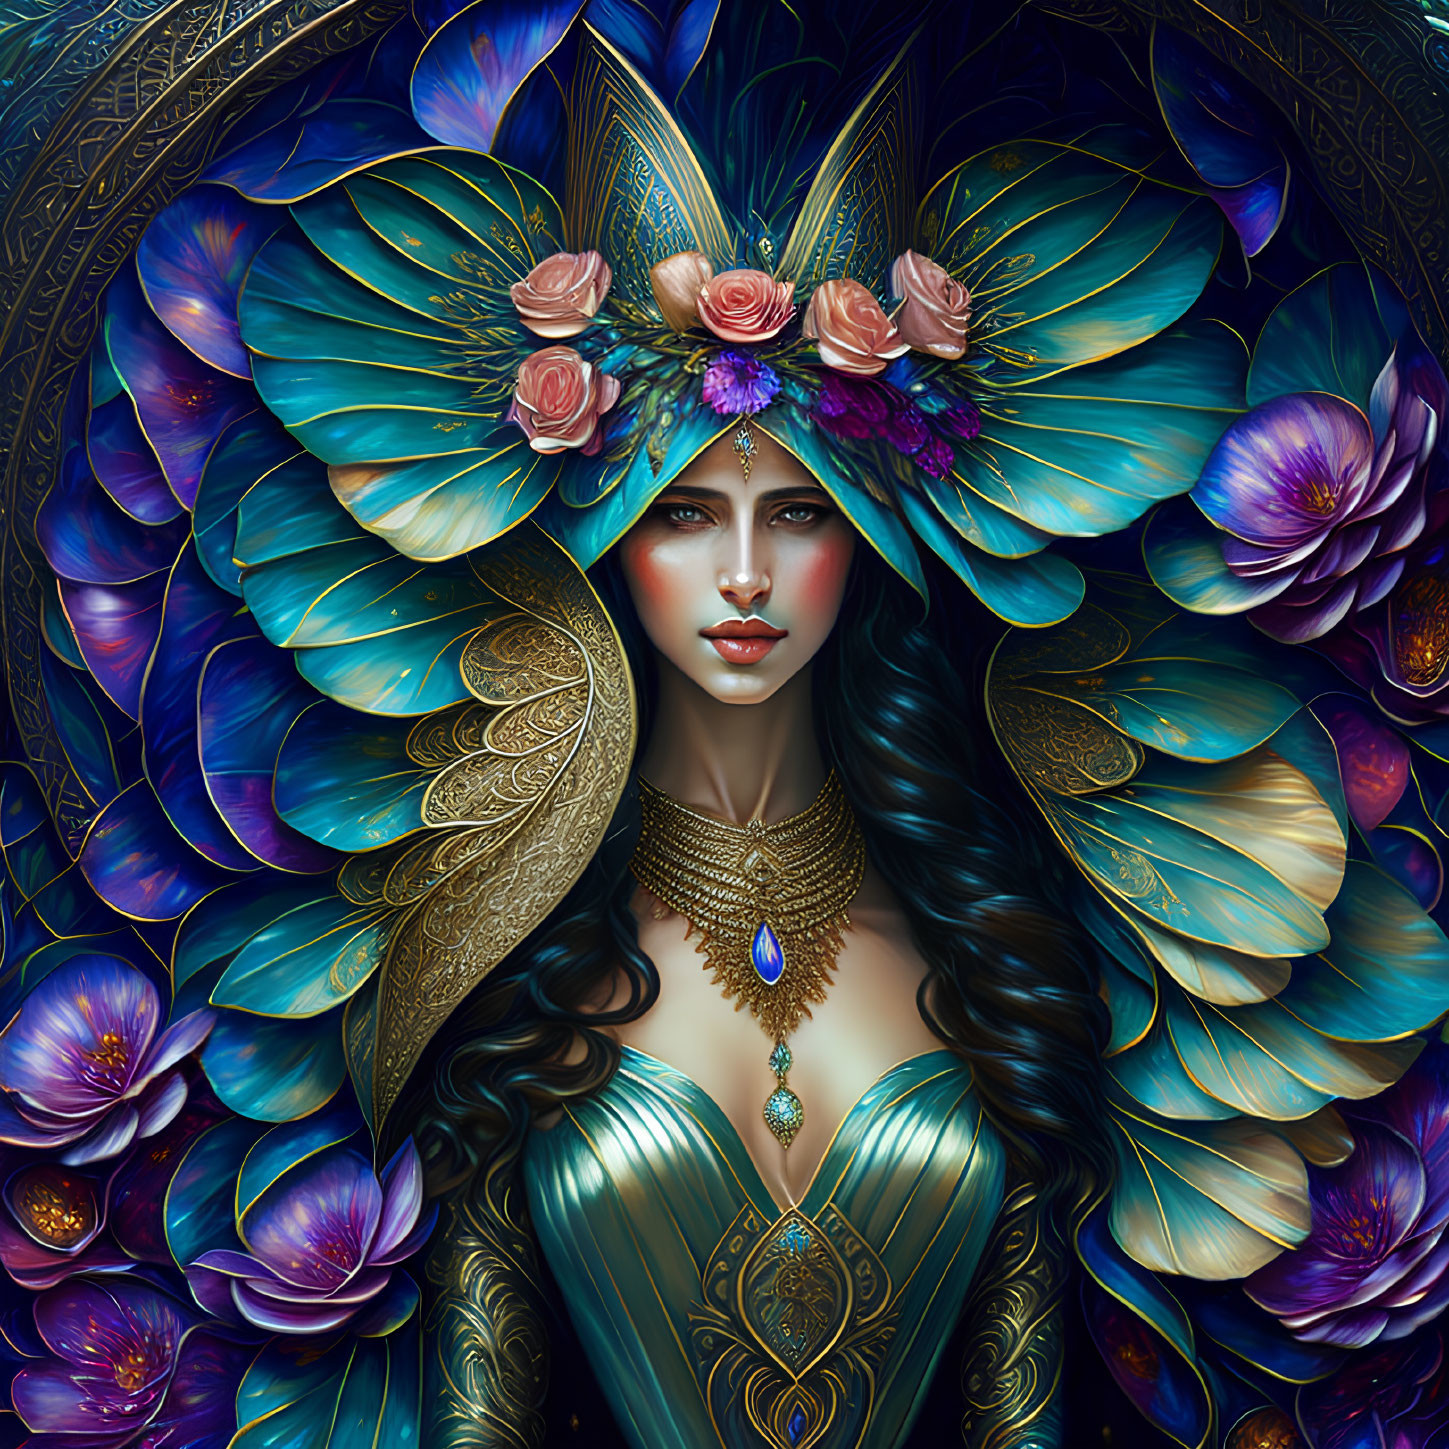 Fantastical woman with blue and green plumage and floral crown in floral setting